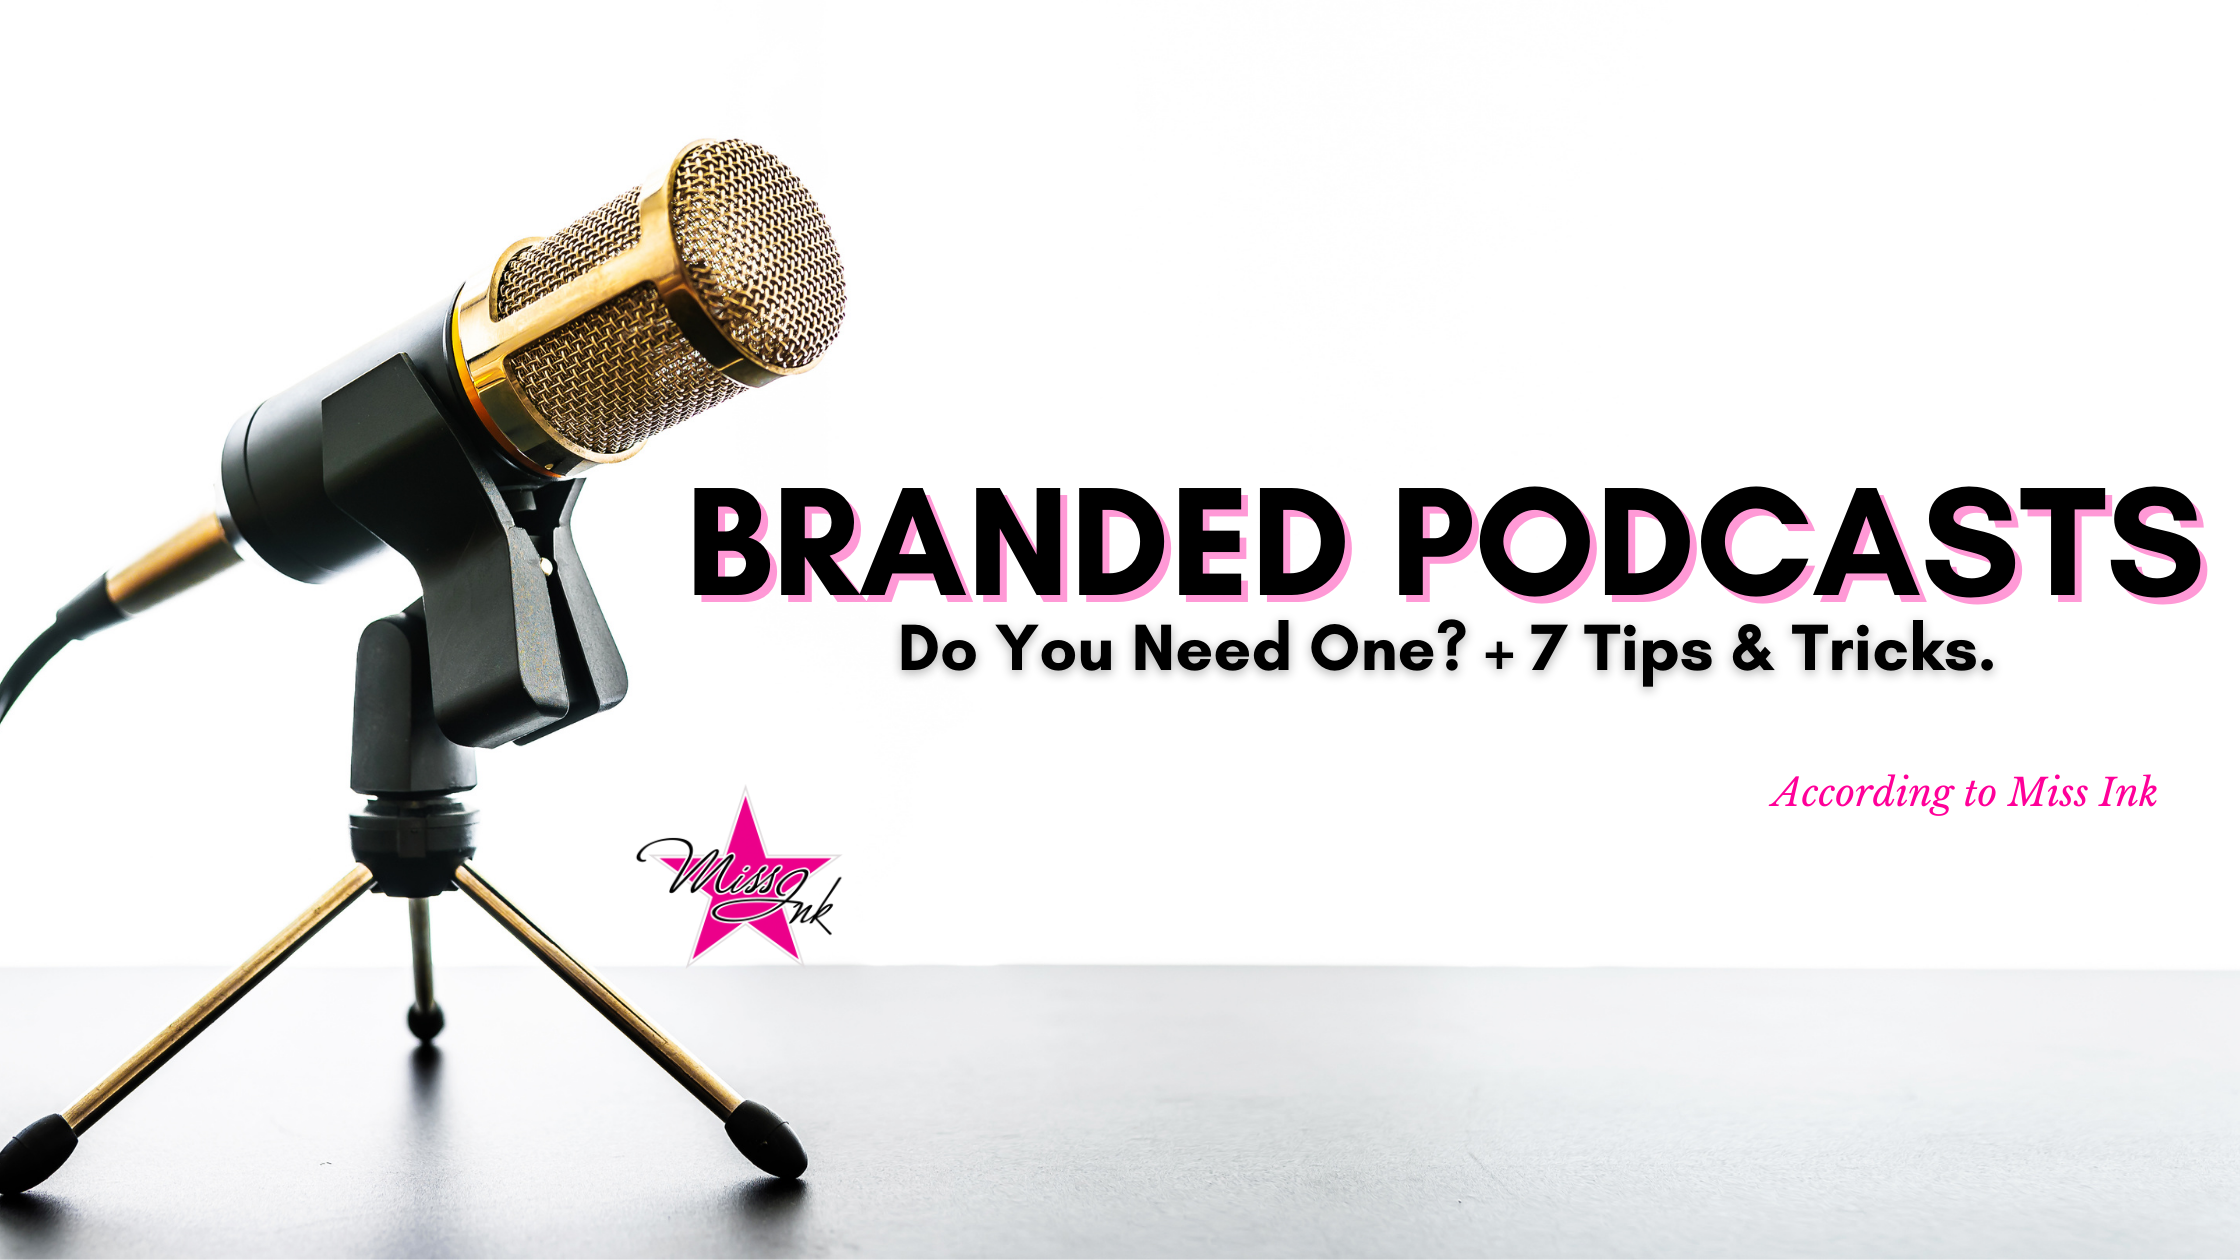 Branded Podcasts: Do You Need One? + 7 Tips & Tricks.